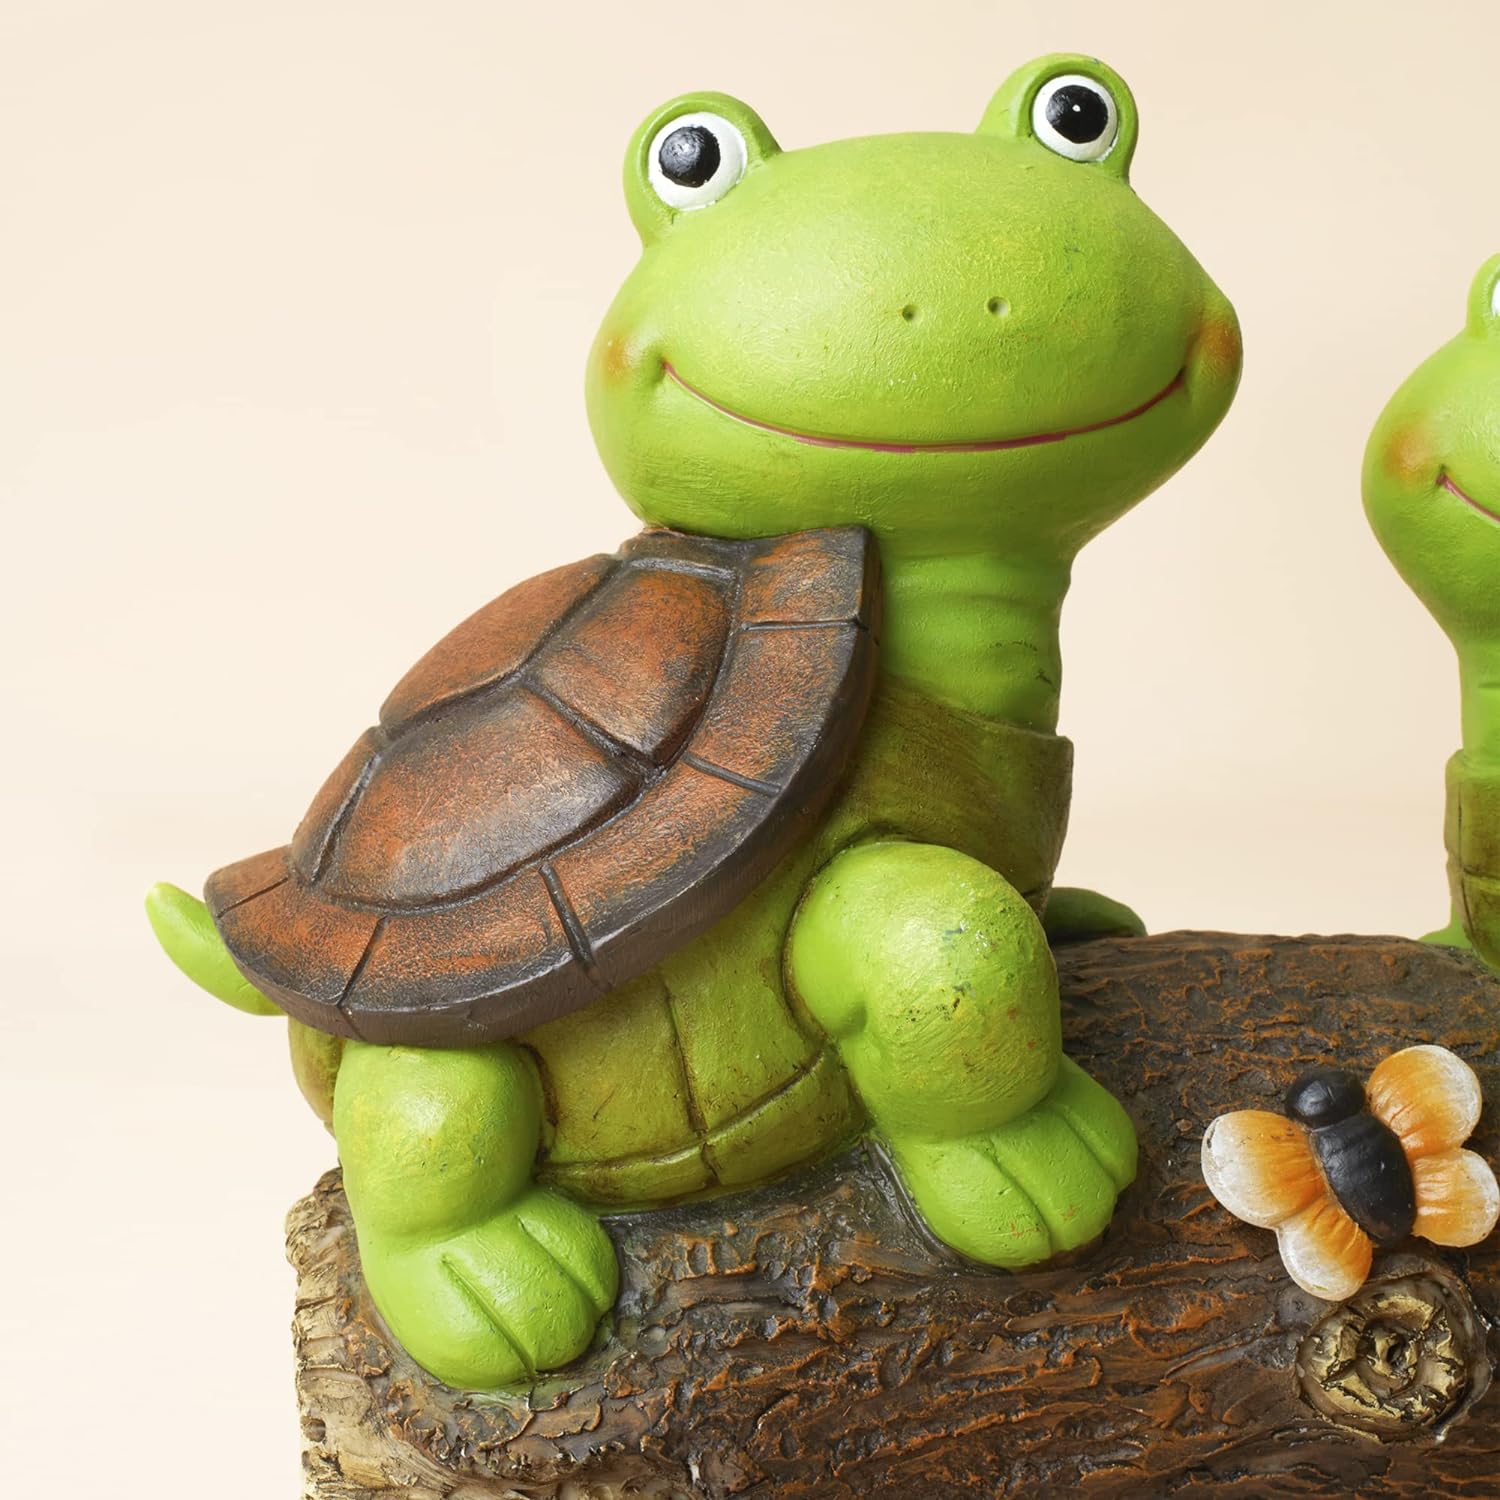 LA JOLIE MUSE Garden Statue Turtles Figurine - Cute Frog Face Turtles Animal Sculpture with Solar LED Lights for Indoor Outdoor Spring Decora